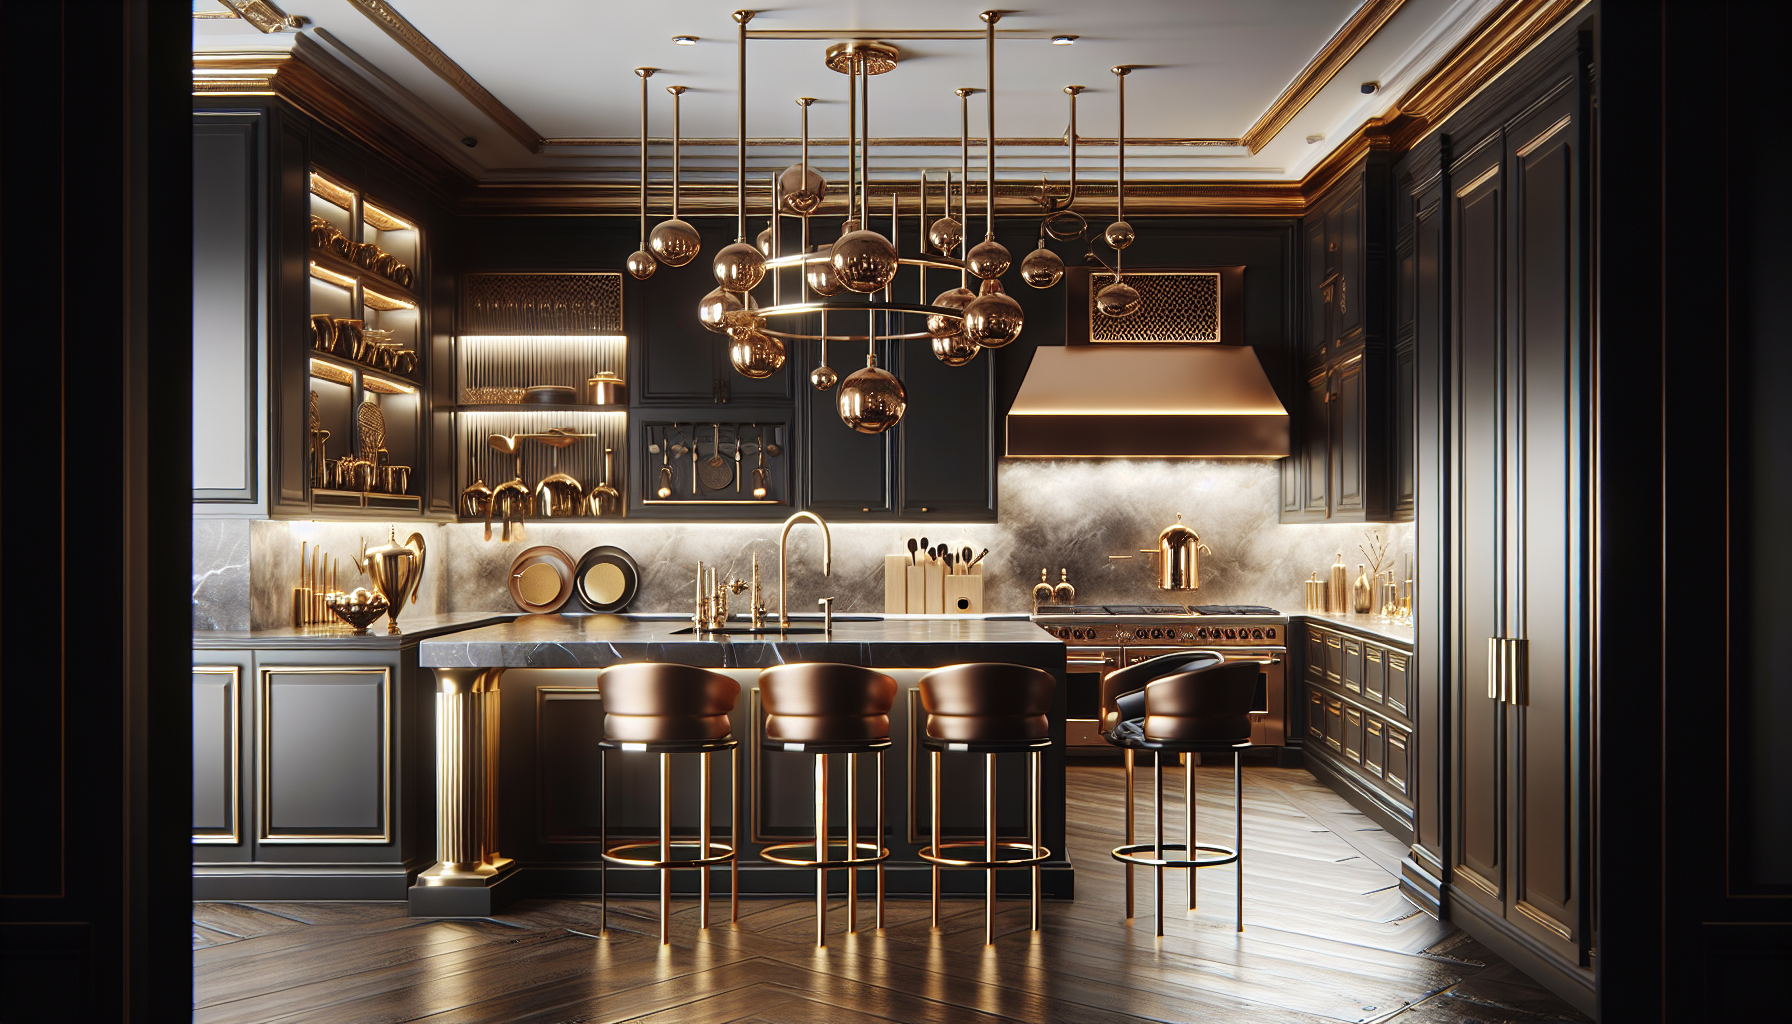 High-end finishes and fixtures in luxury kitchen